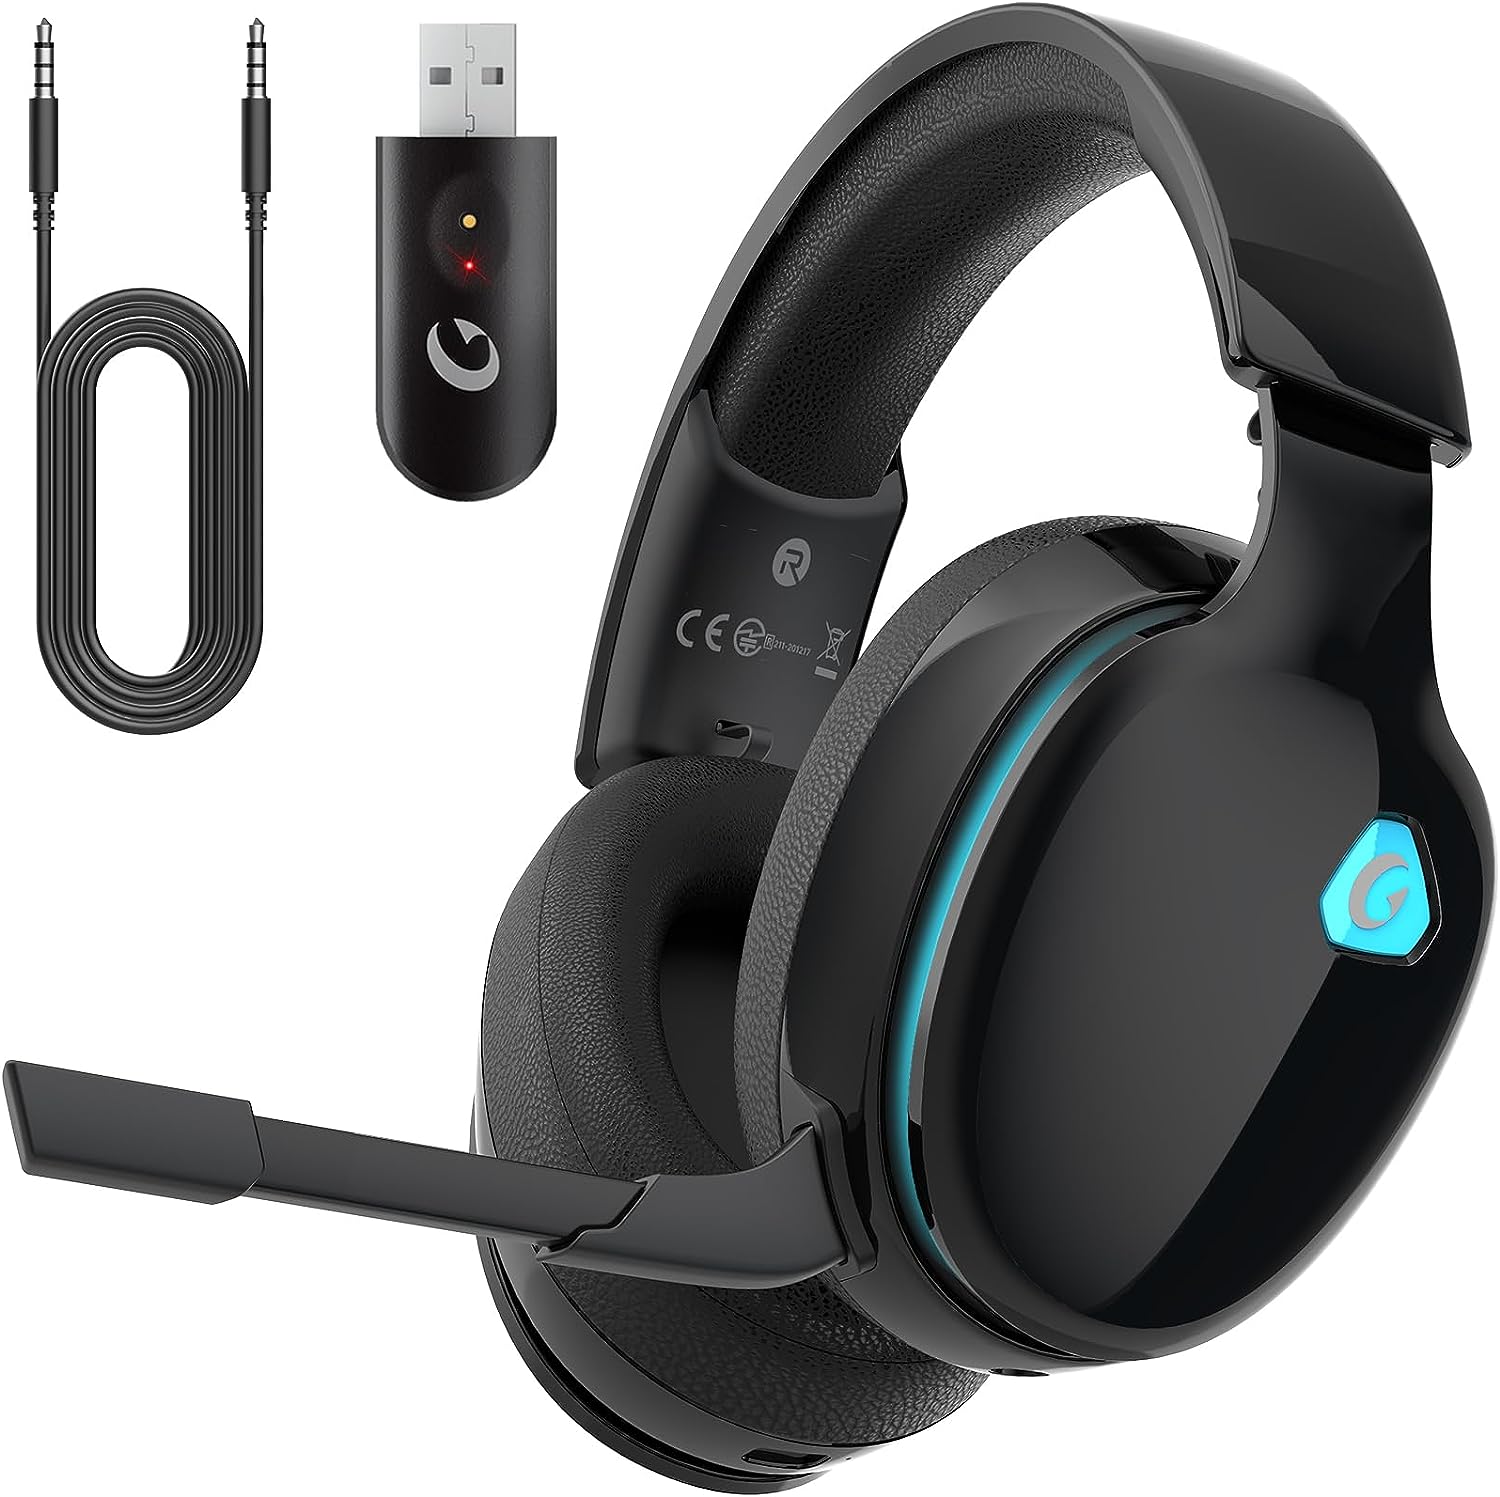 Gvyugke Wireless Gaming Headset 2.4GHz USB for PS5, PS4, PC, Switch, Mac, Bluetooth 5.2 Gaming Headphones with Detachable Microphone for Gamer, Surround Sound, 3.5mm Wired Jack for Xbox Series(Black) : Video Games